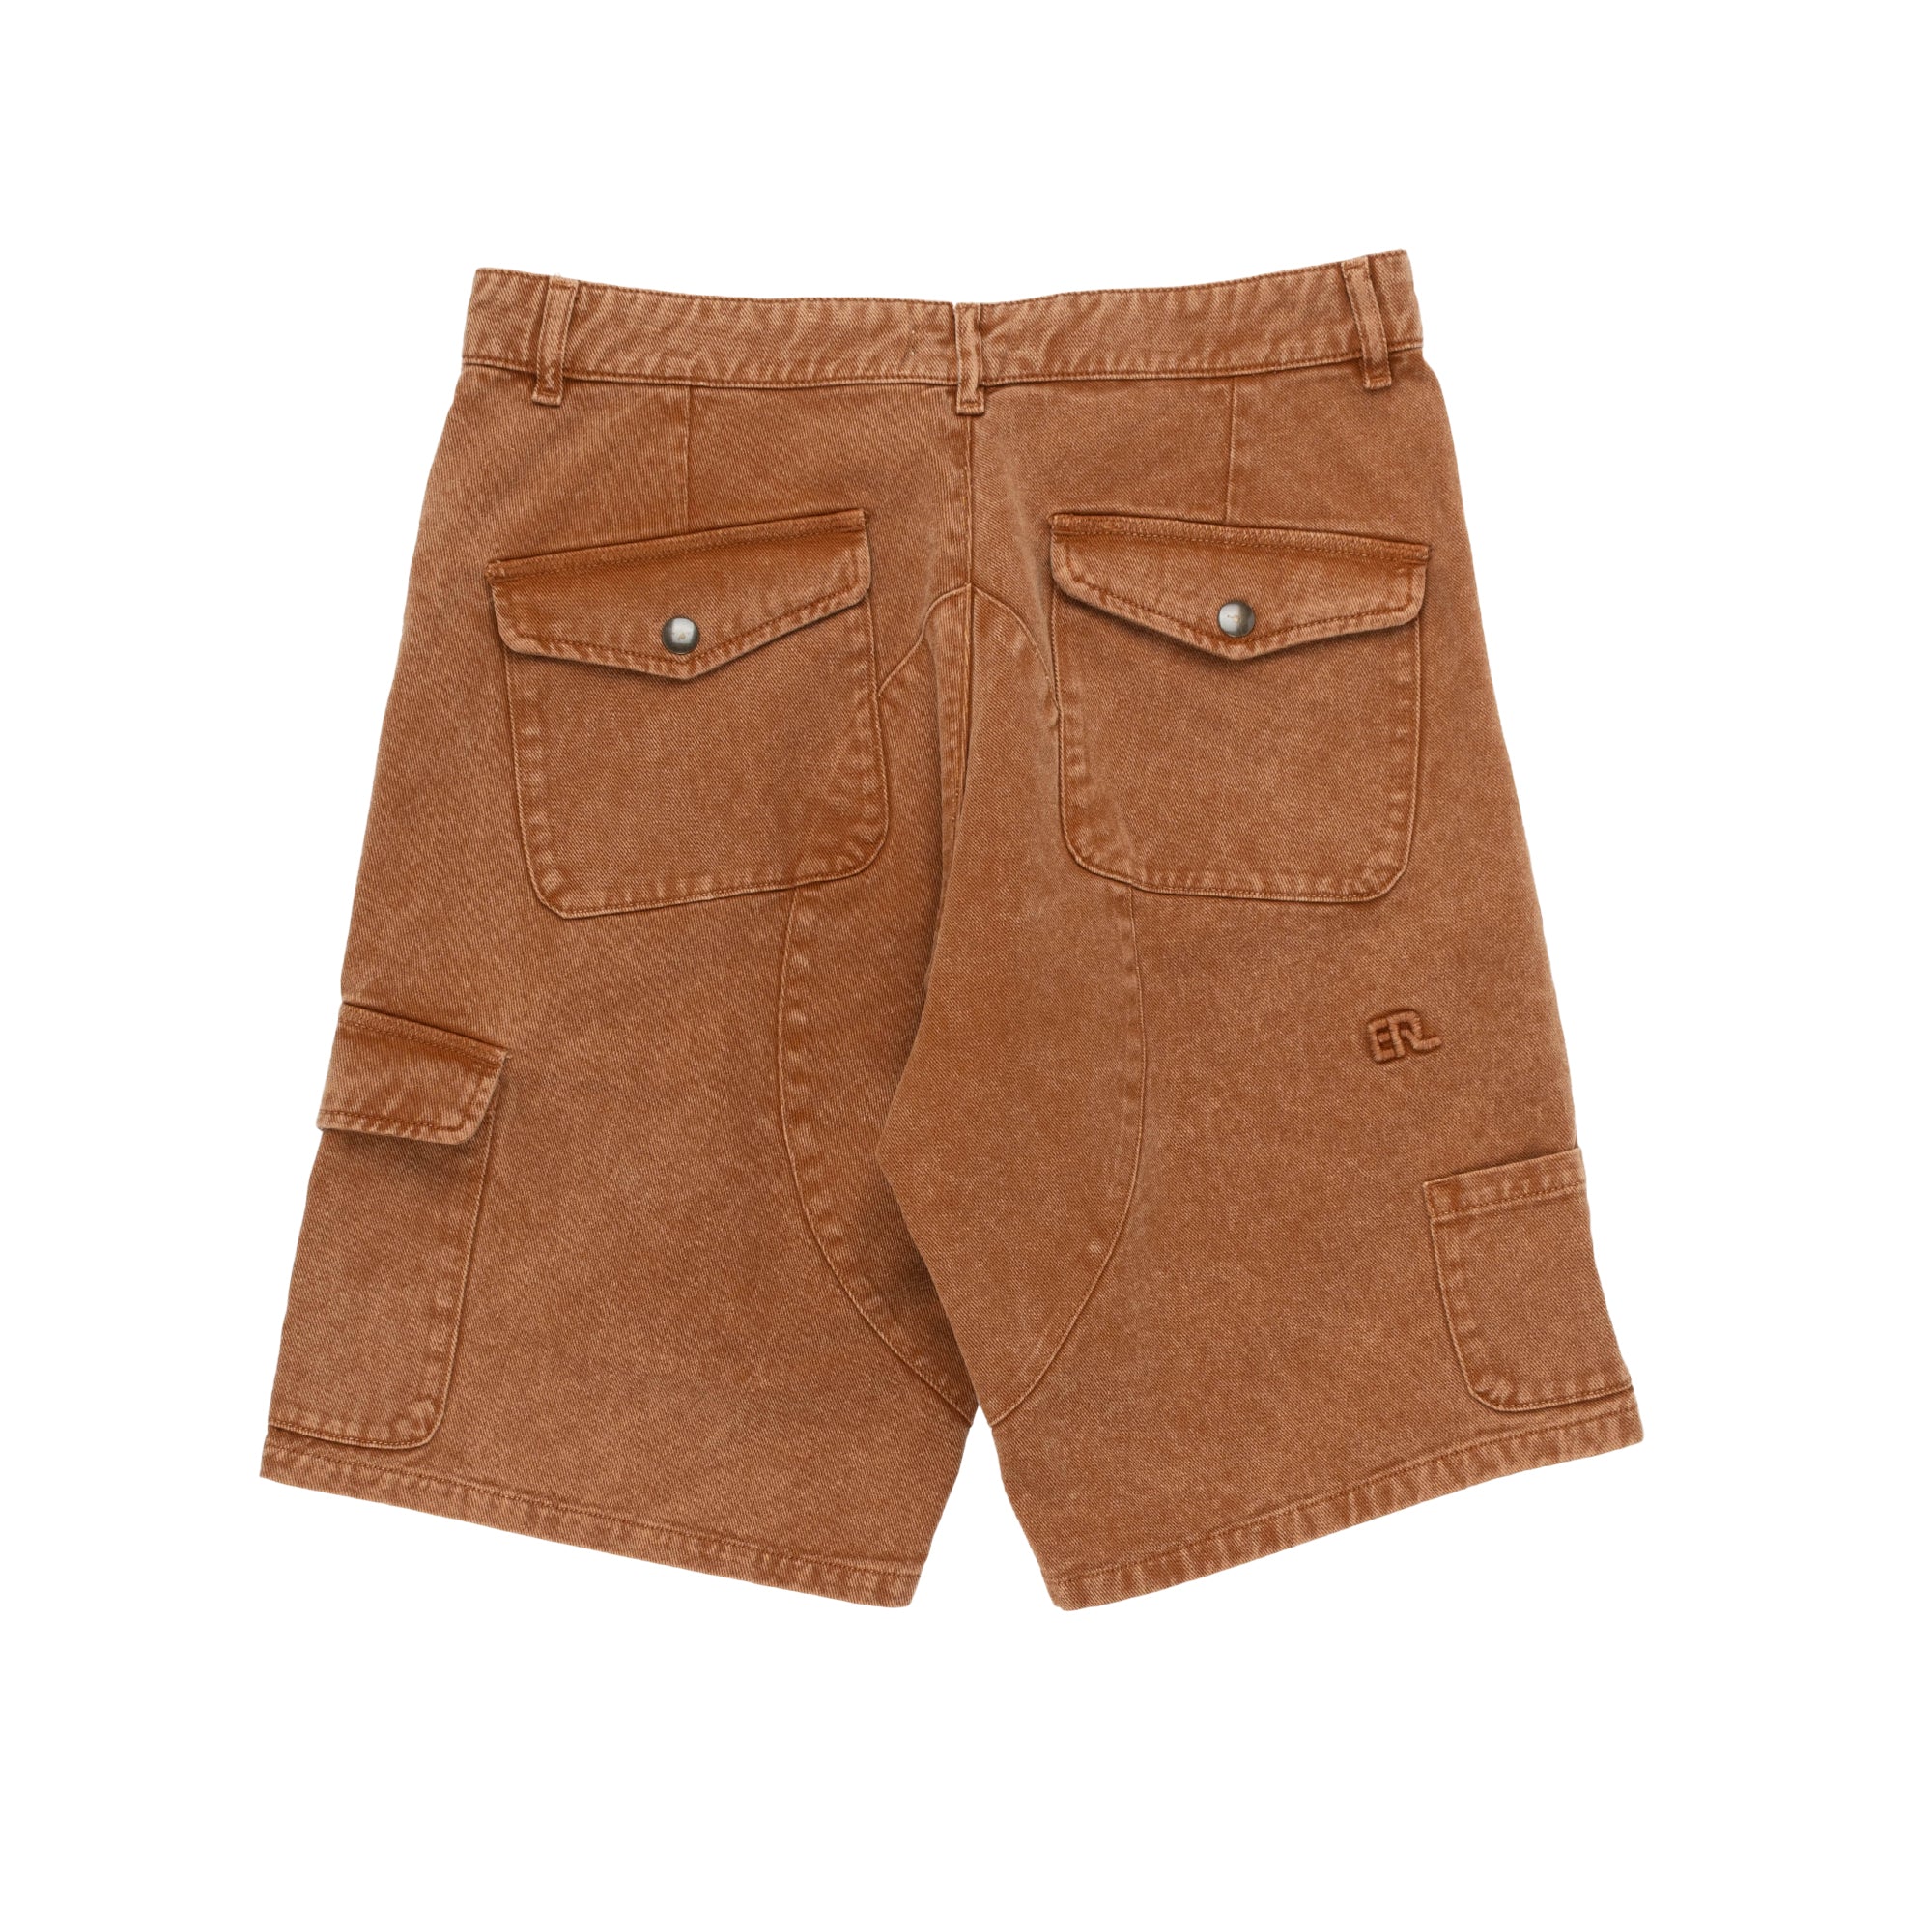 ERL Woven Cargo Shorts Brown ERL08P009